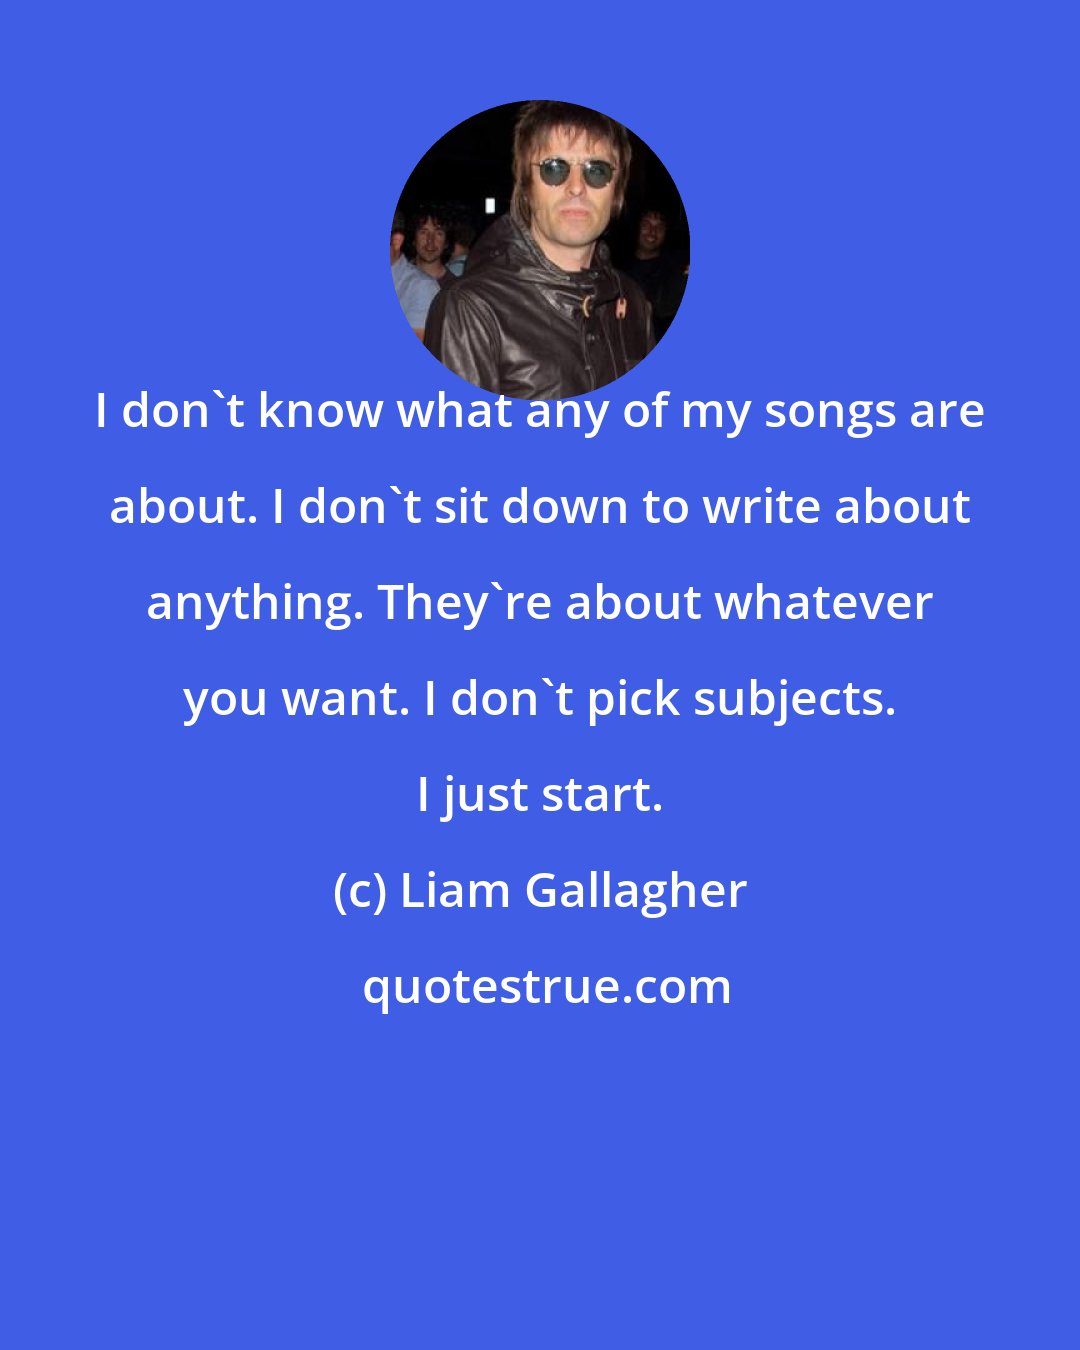 Liam Gallagher: I don't know what any of my songs are about. I don't sit down to write about anything. They're about whatever you want. I don't pick subjects. I just start.